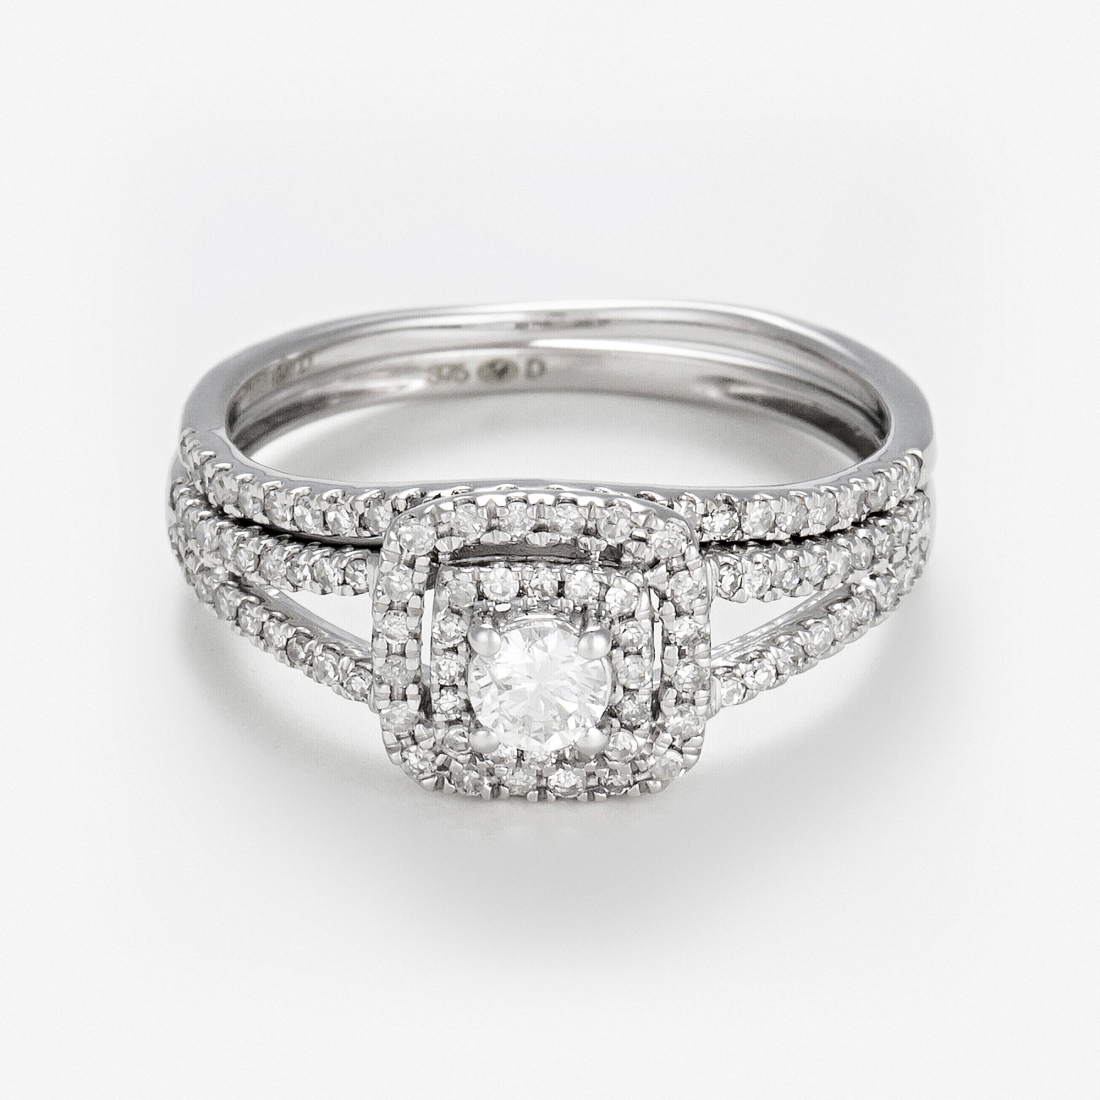 Women's 'Carré Somptueux' Ring